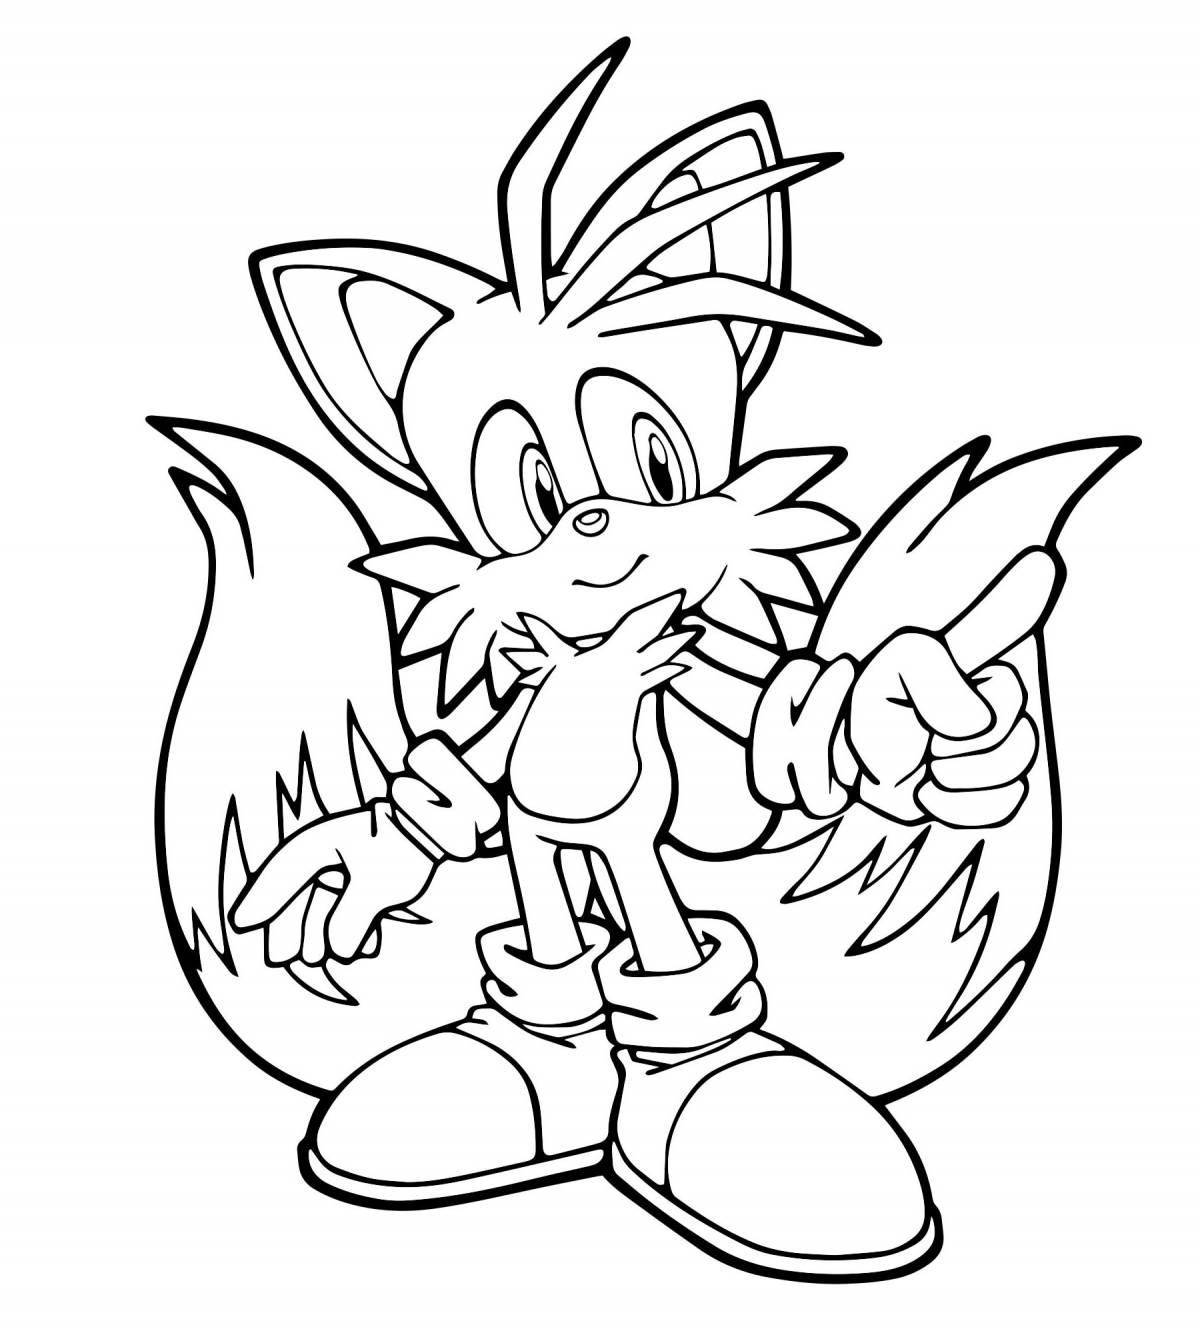 Curly tails coloring page